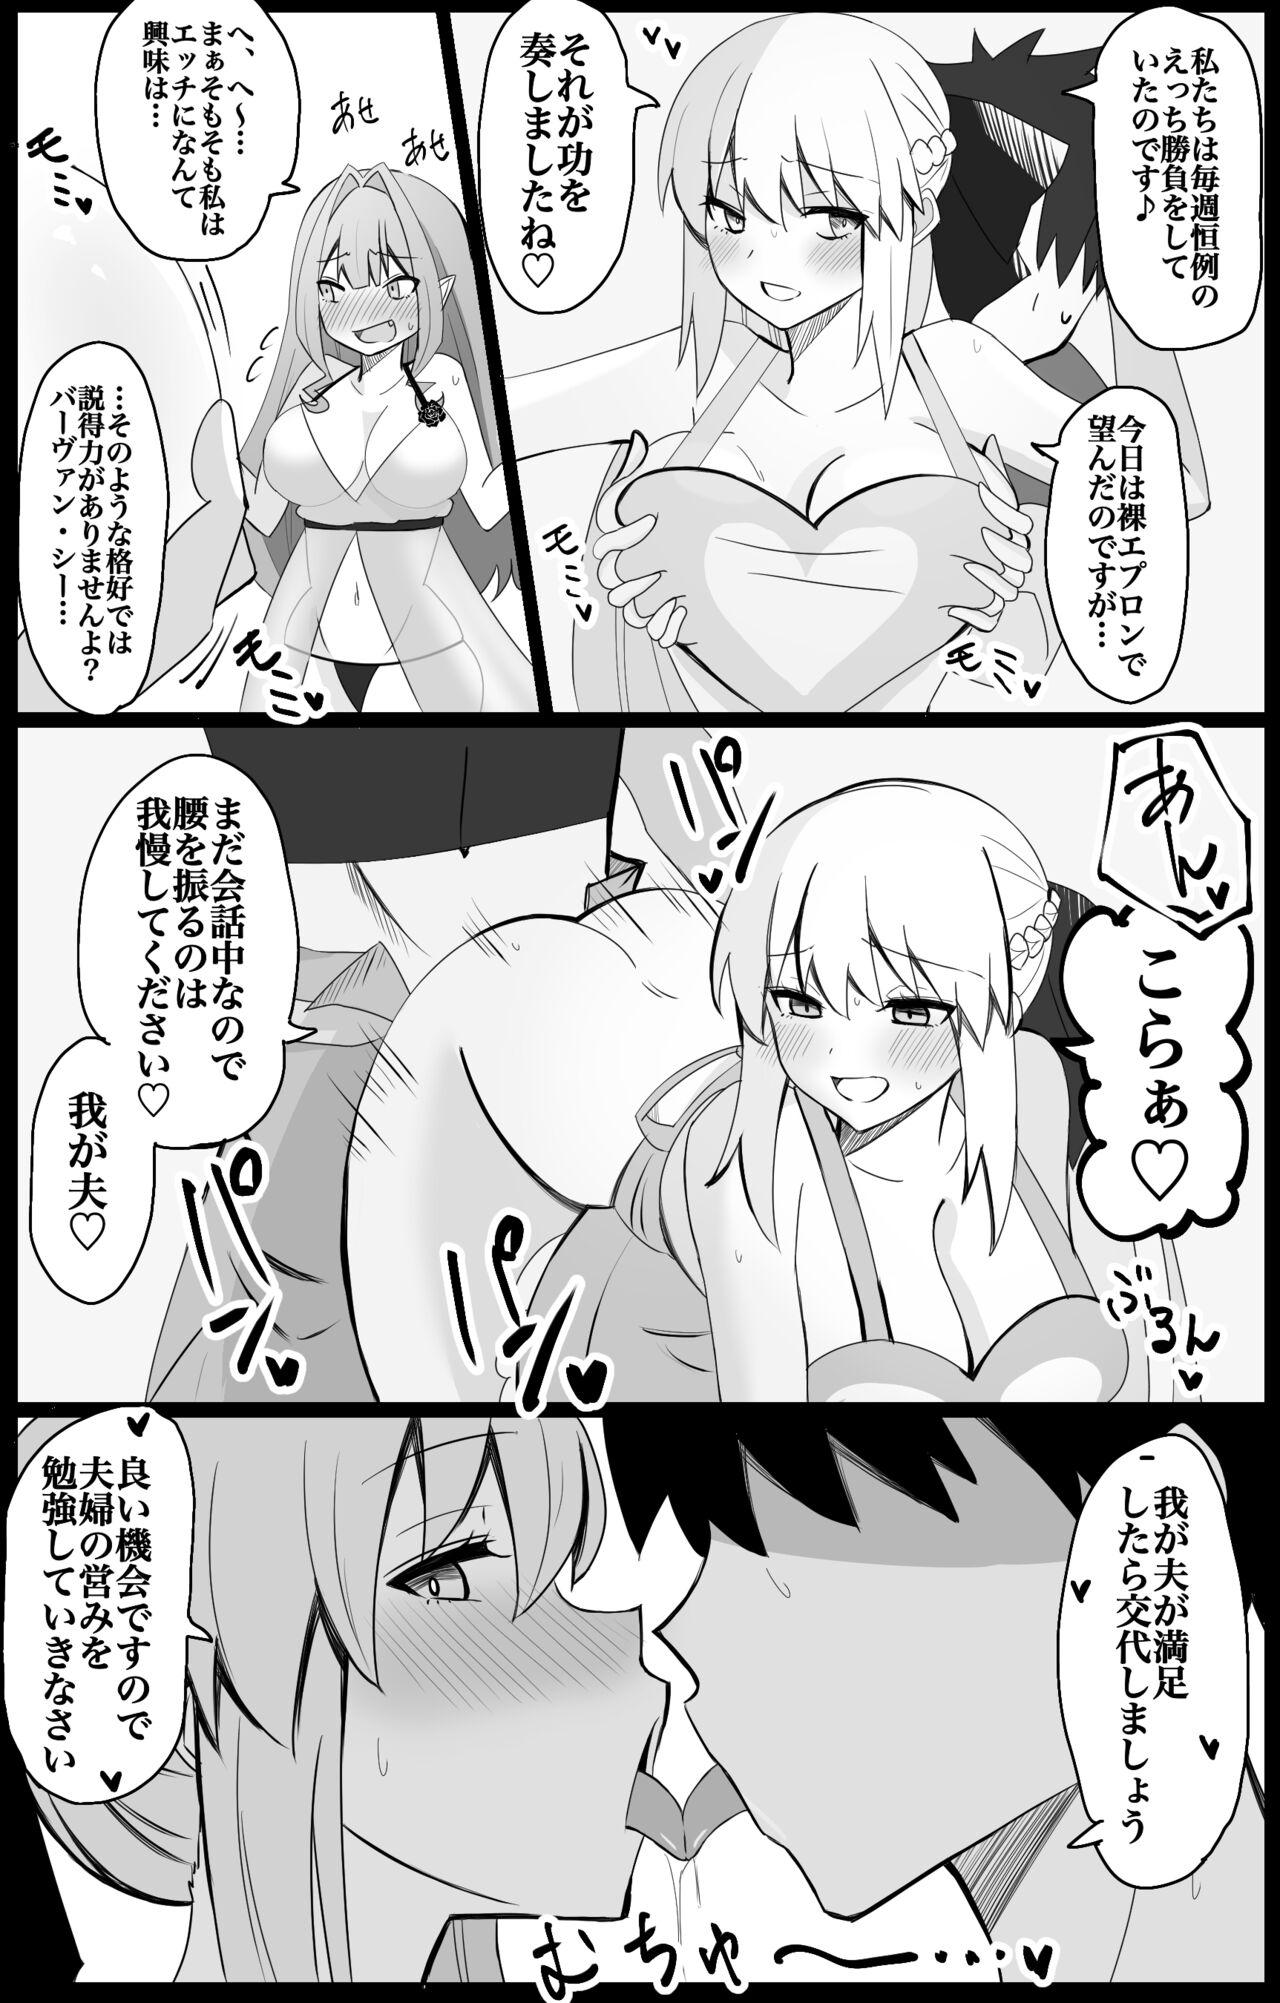 Nasty MorTri Oyakodon - Fate grand order Hot Cunt - Page 2